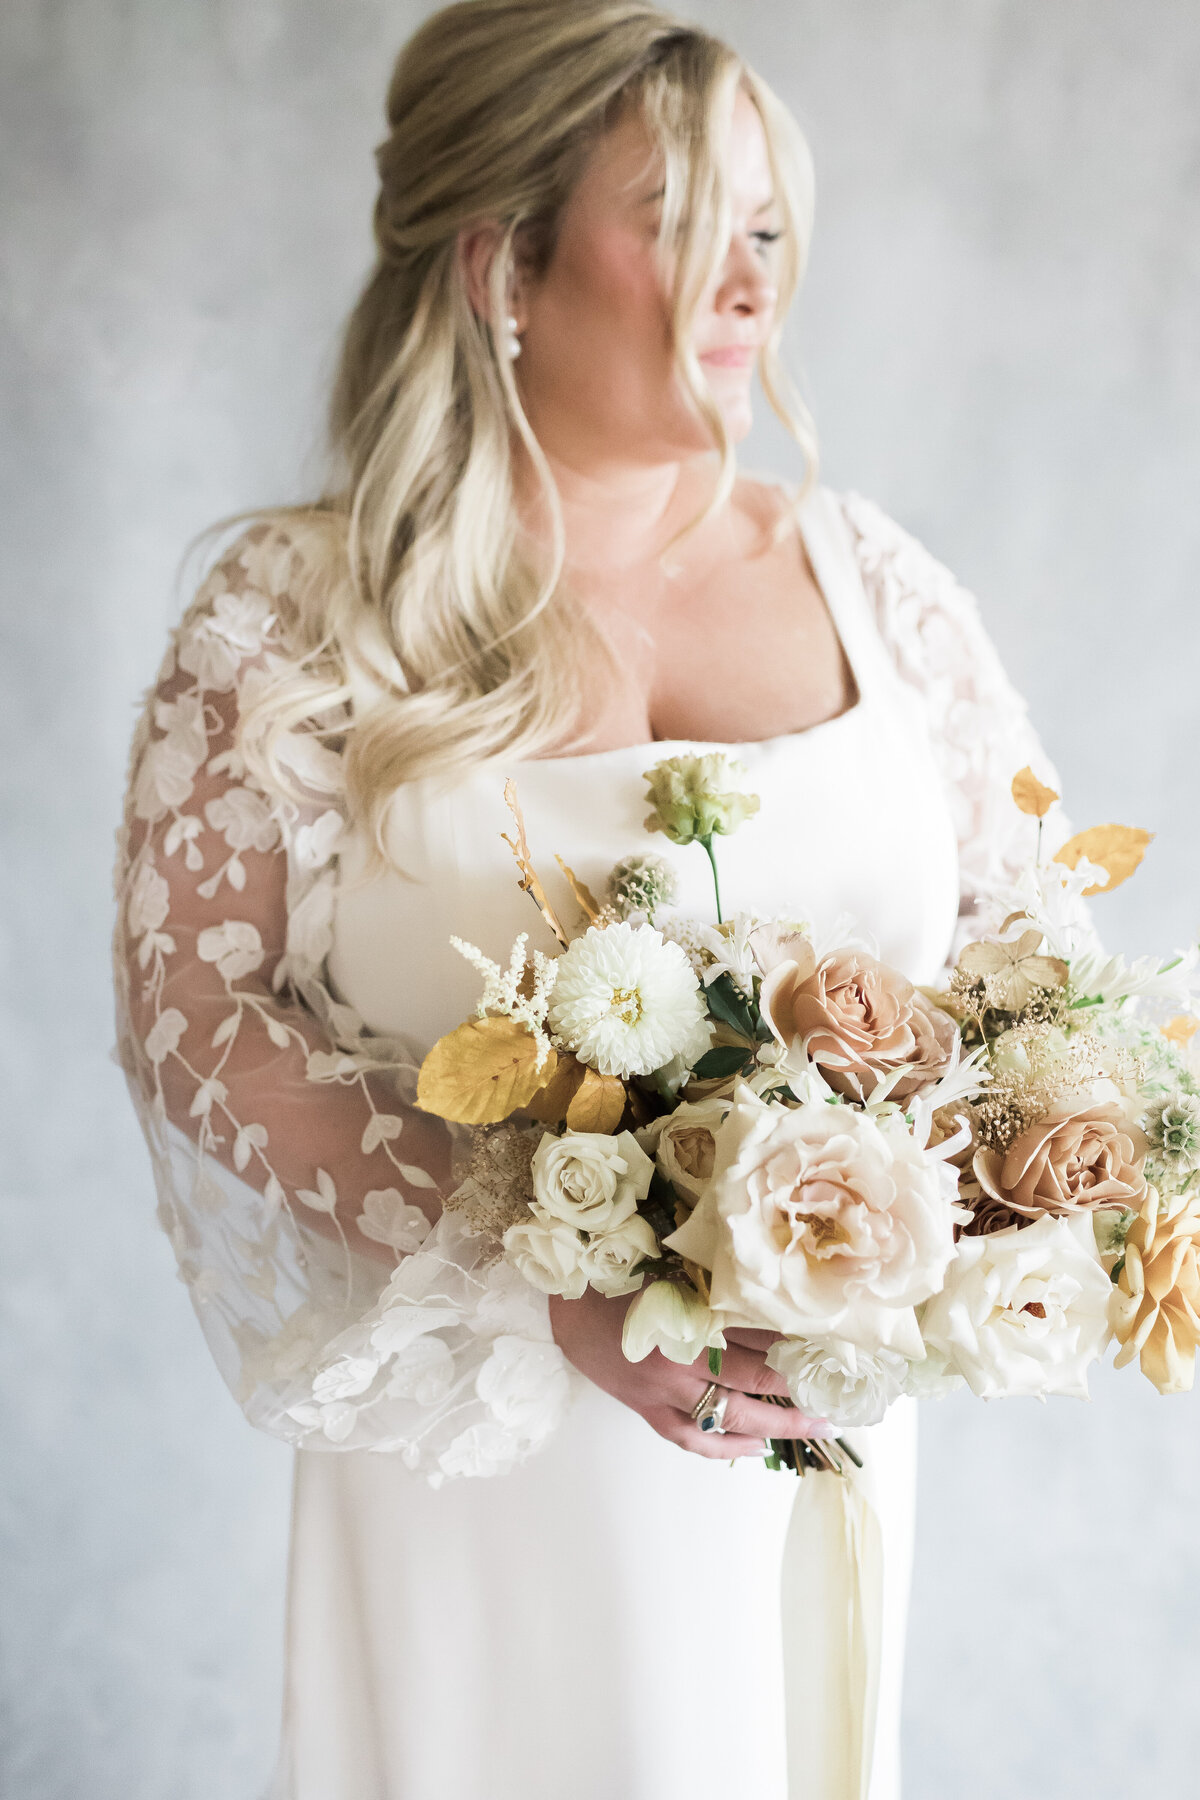 Stunning bride in wedding gown with lace sleeves holds her bouquet